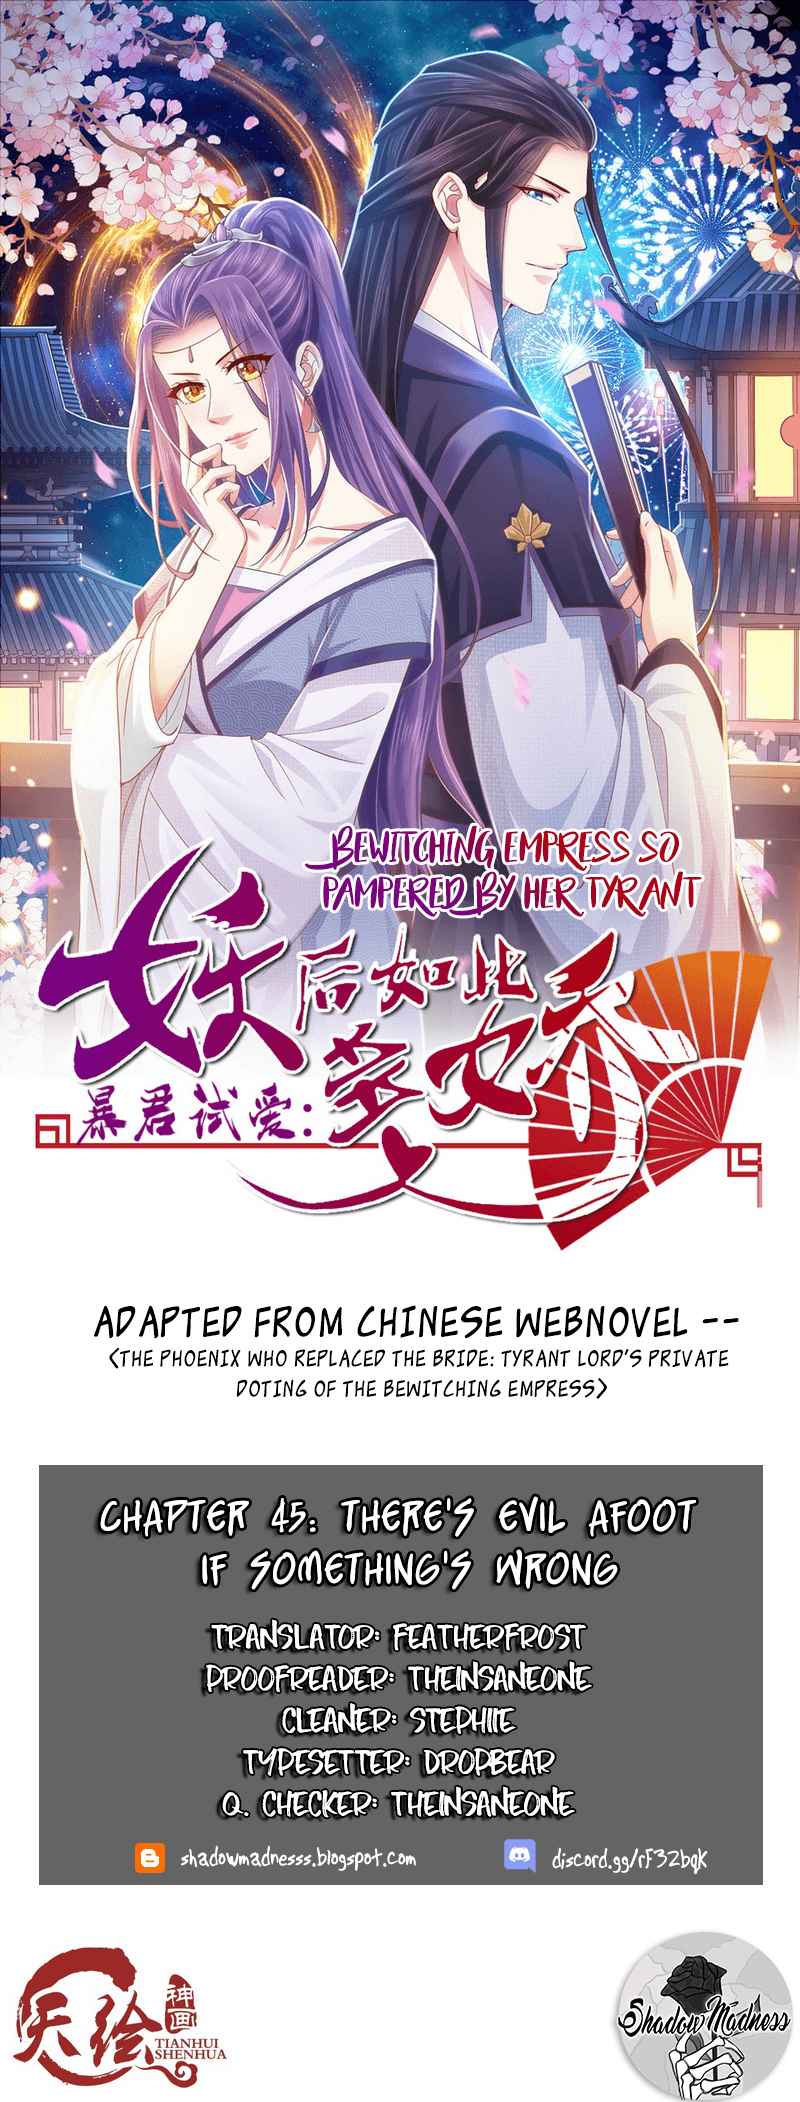 Bewitching Empress So Pampered by Her Tyrant Ch. 45 There's evil afoot if something's wrong